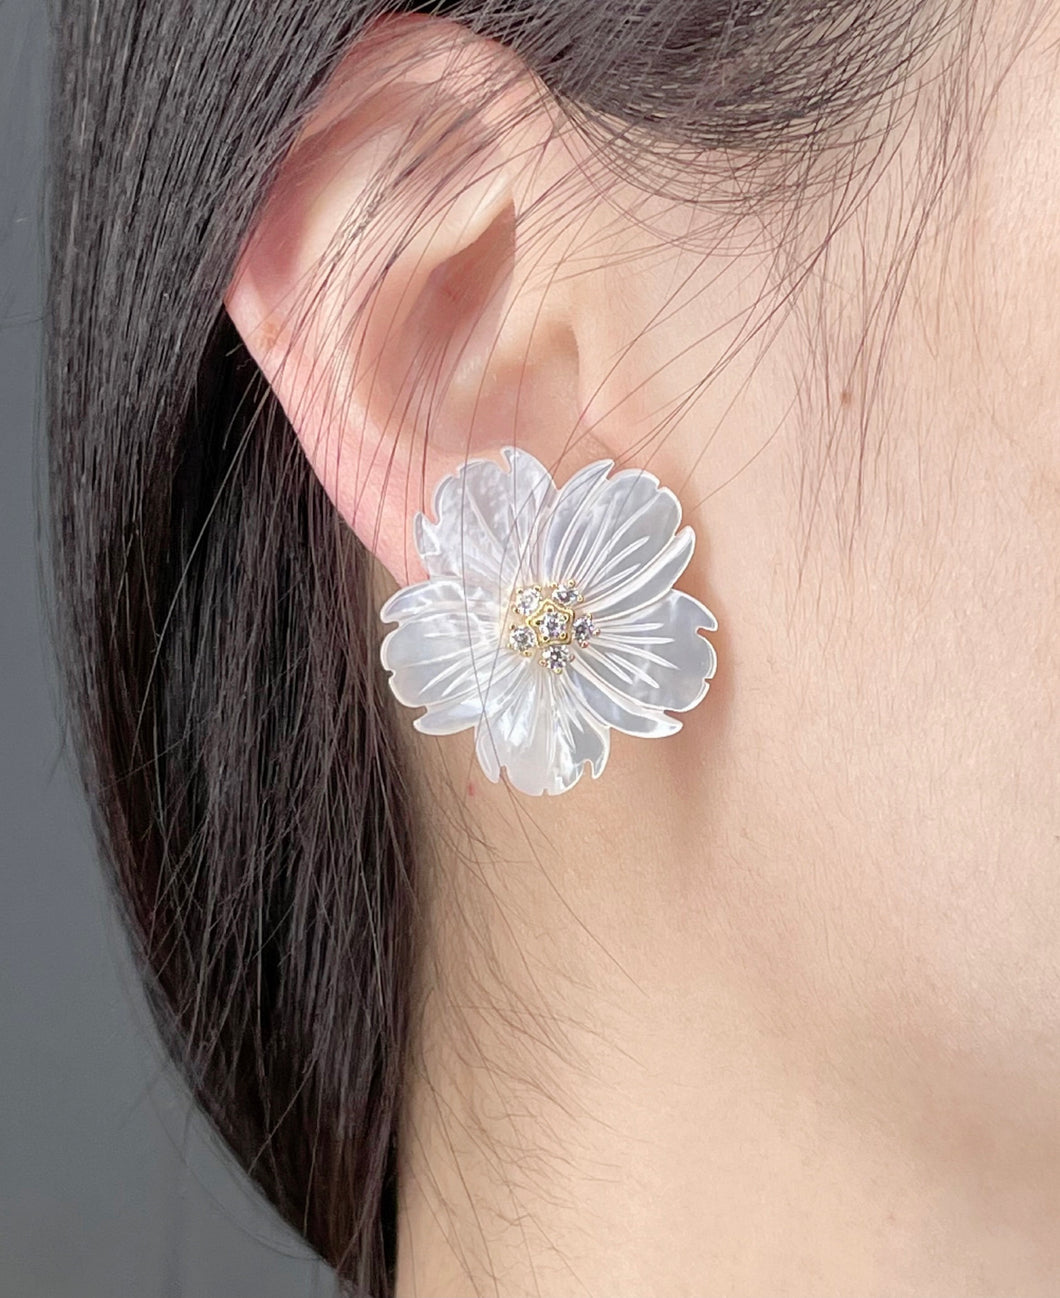 18K Gold Plated Sterling Silver With 5A Flower Shape Mother of Pearl Flower Stud Earrings Perfect Gift for Her